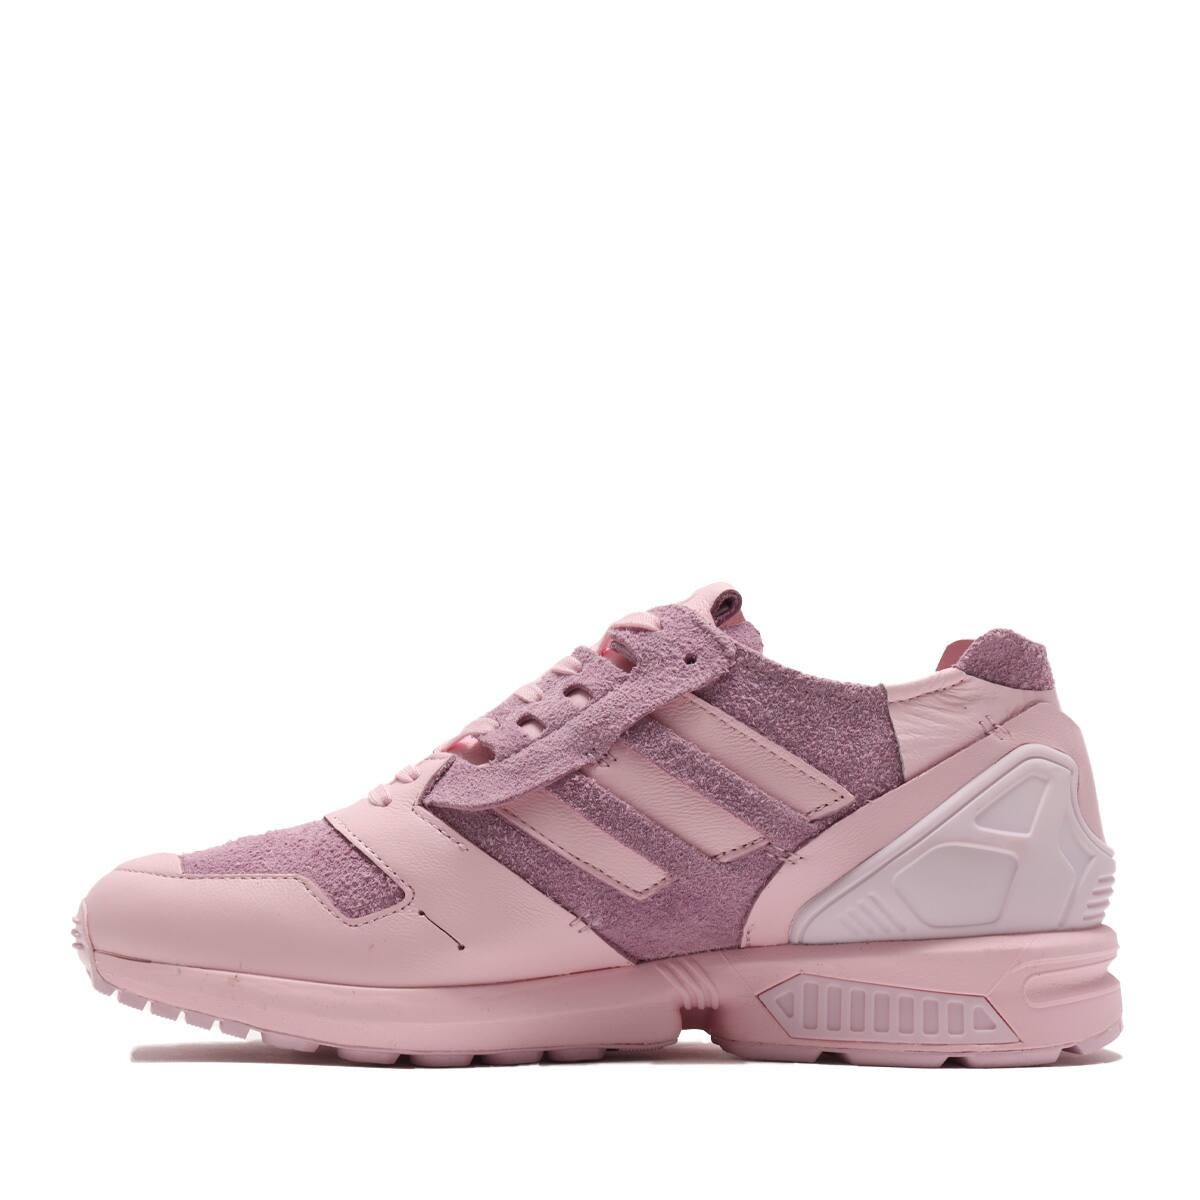 adidas ZX 8000 MINIMALIST ICONS CLEAR PINK/CLEAR PINK/CLEAR PINK 